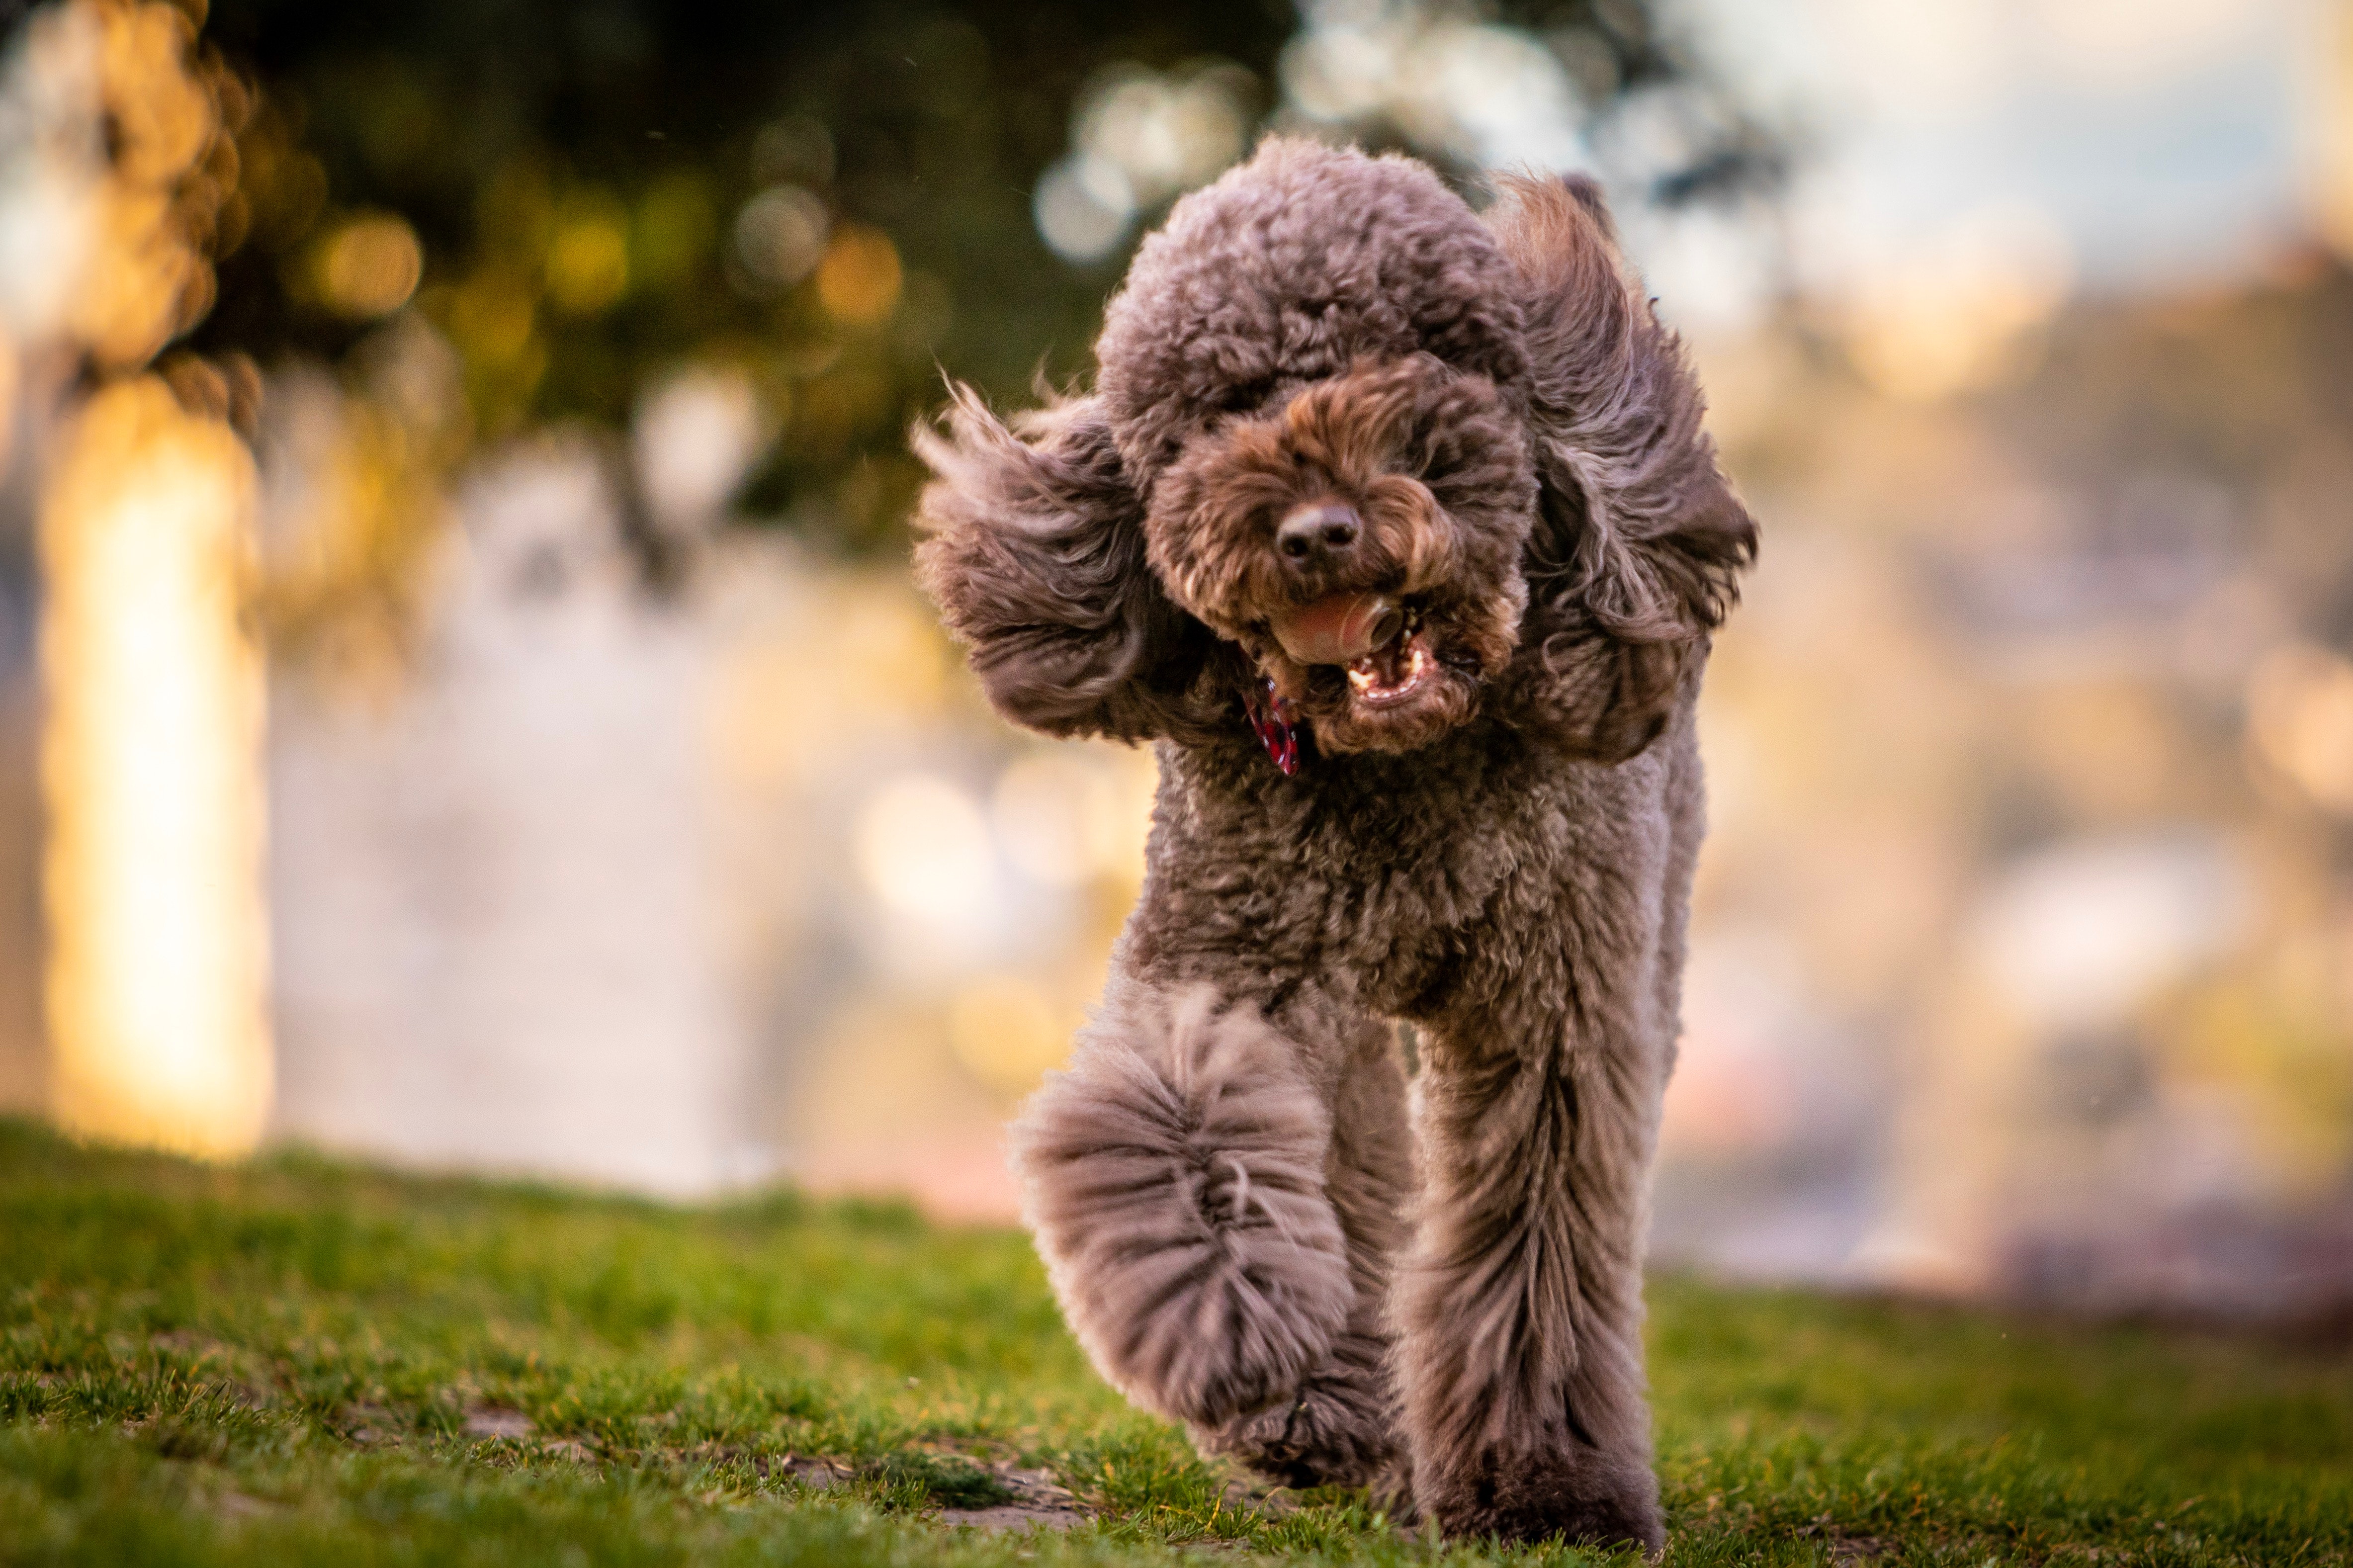 An adult gray toy poodle running on a grass field